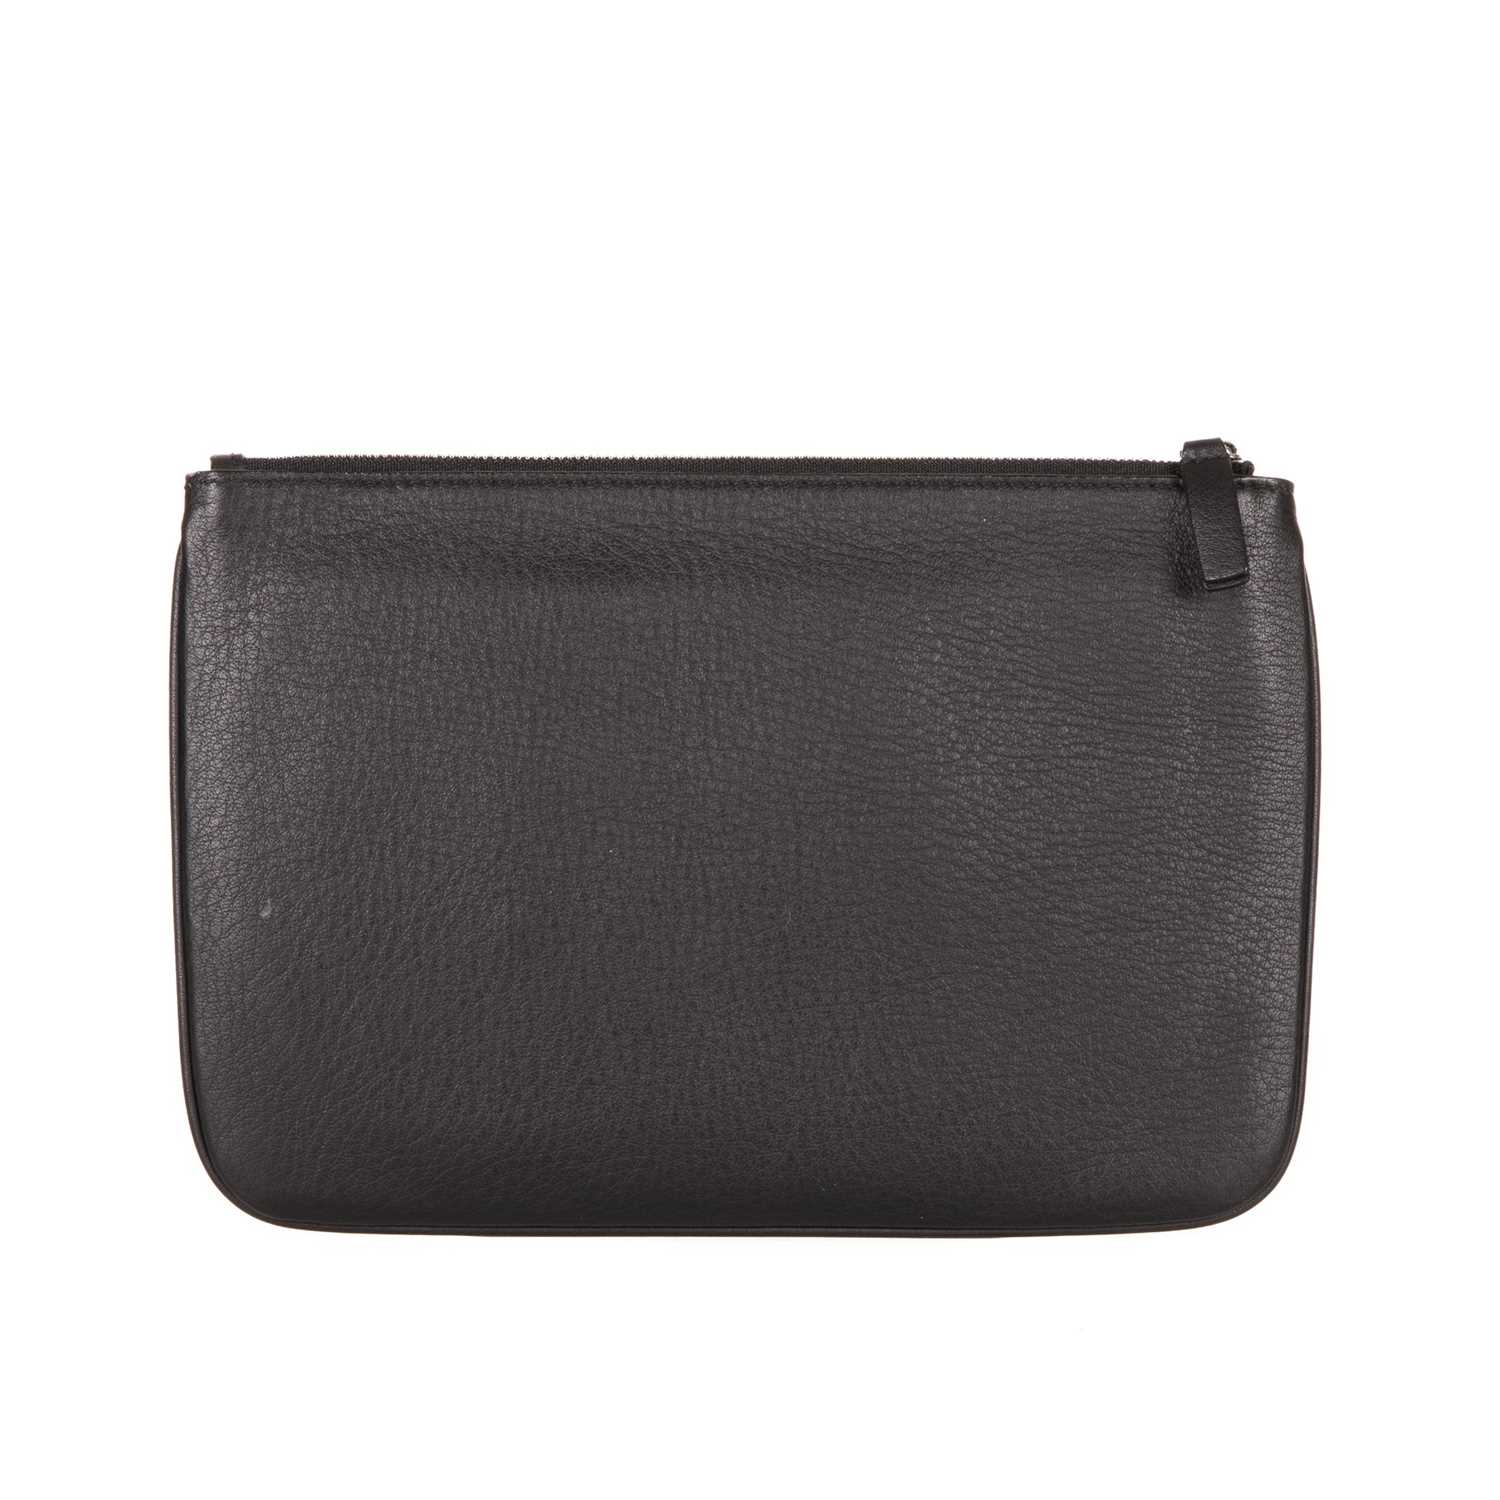 Balenciaga, a black leather clutch, featuring a top zip fastening and one interior side pocket, - Image 2 of 2